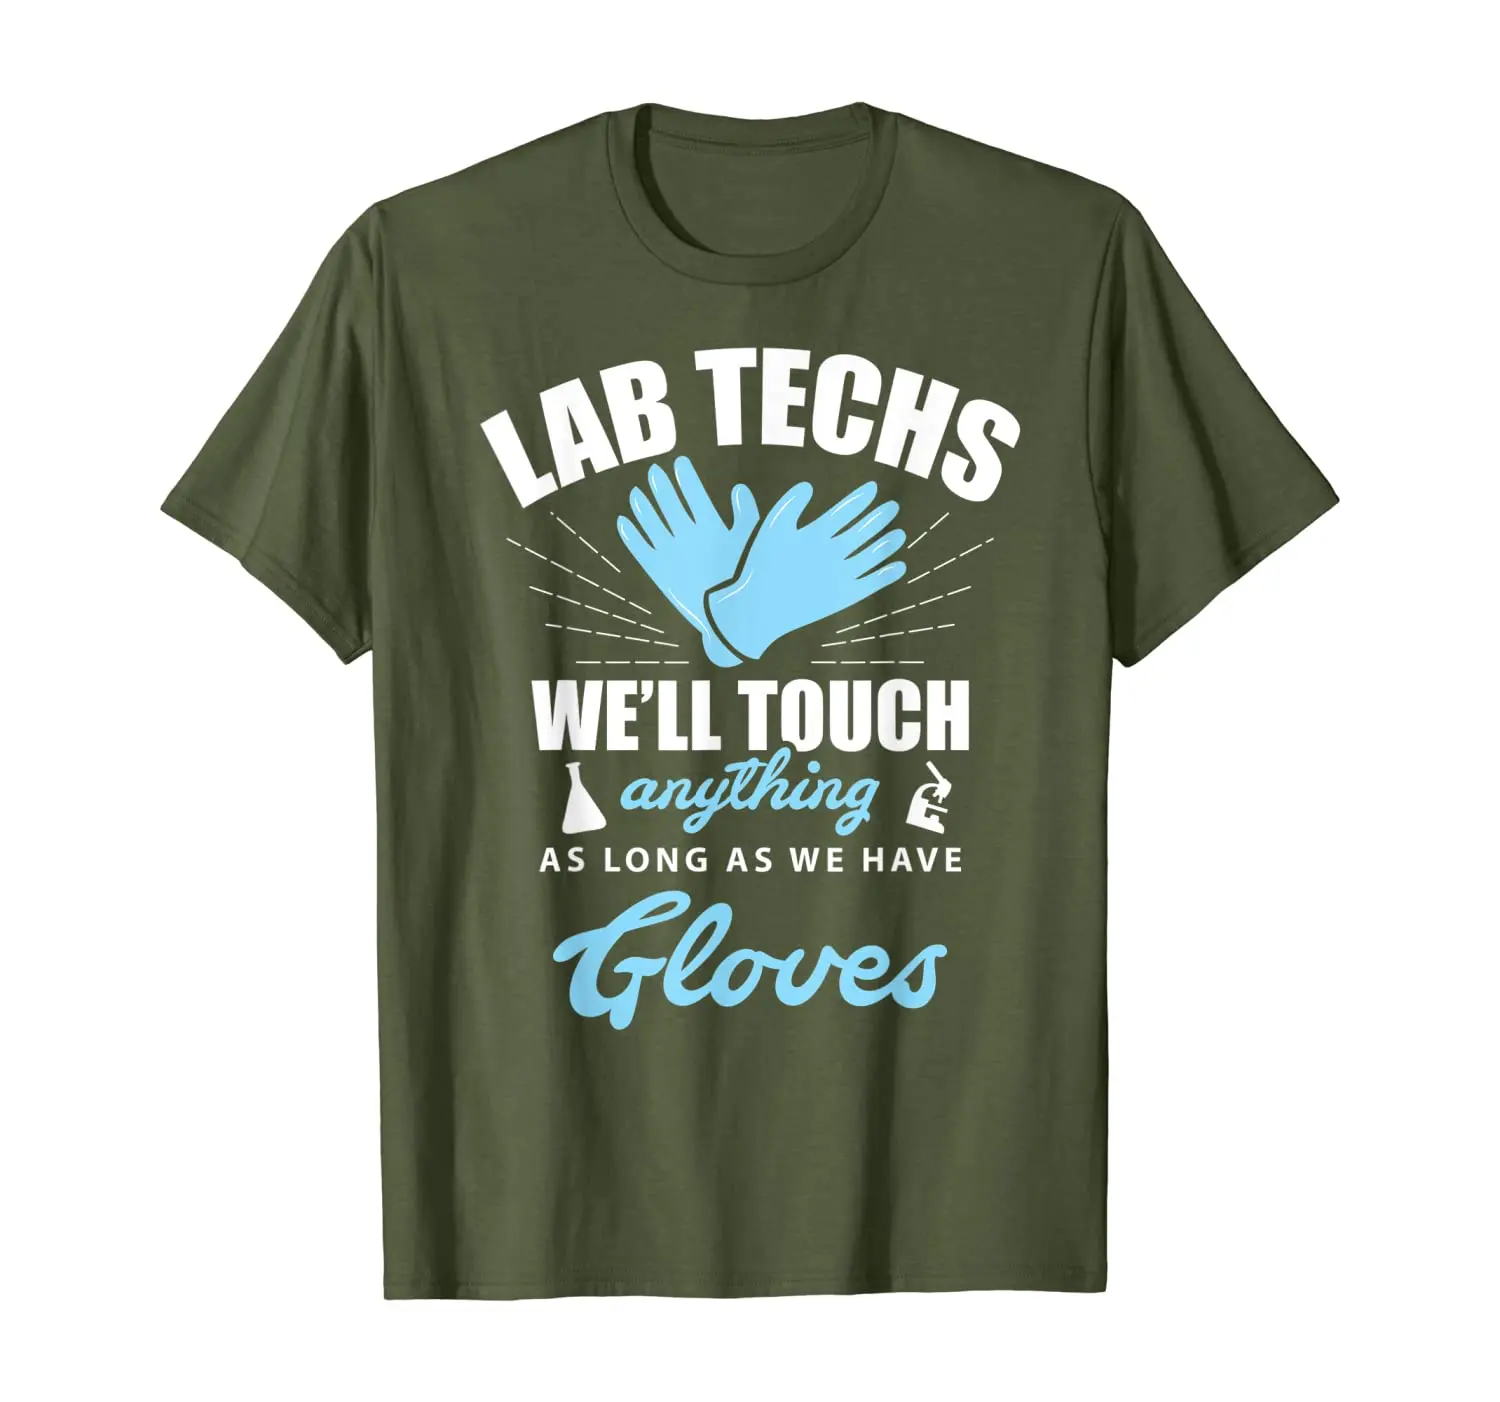 

Lab Tech We'll Touch Anything as long as we have Gloves on T-Shirt